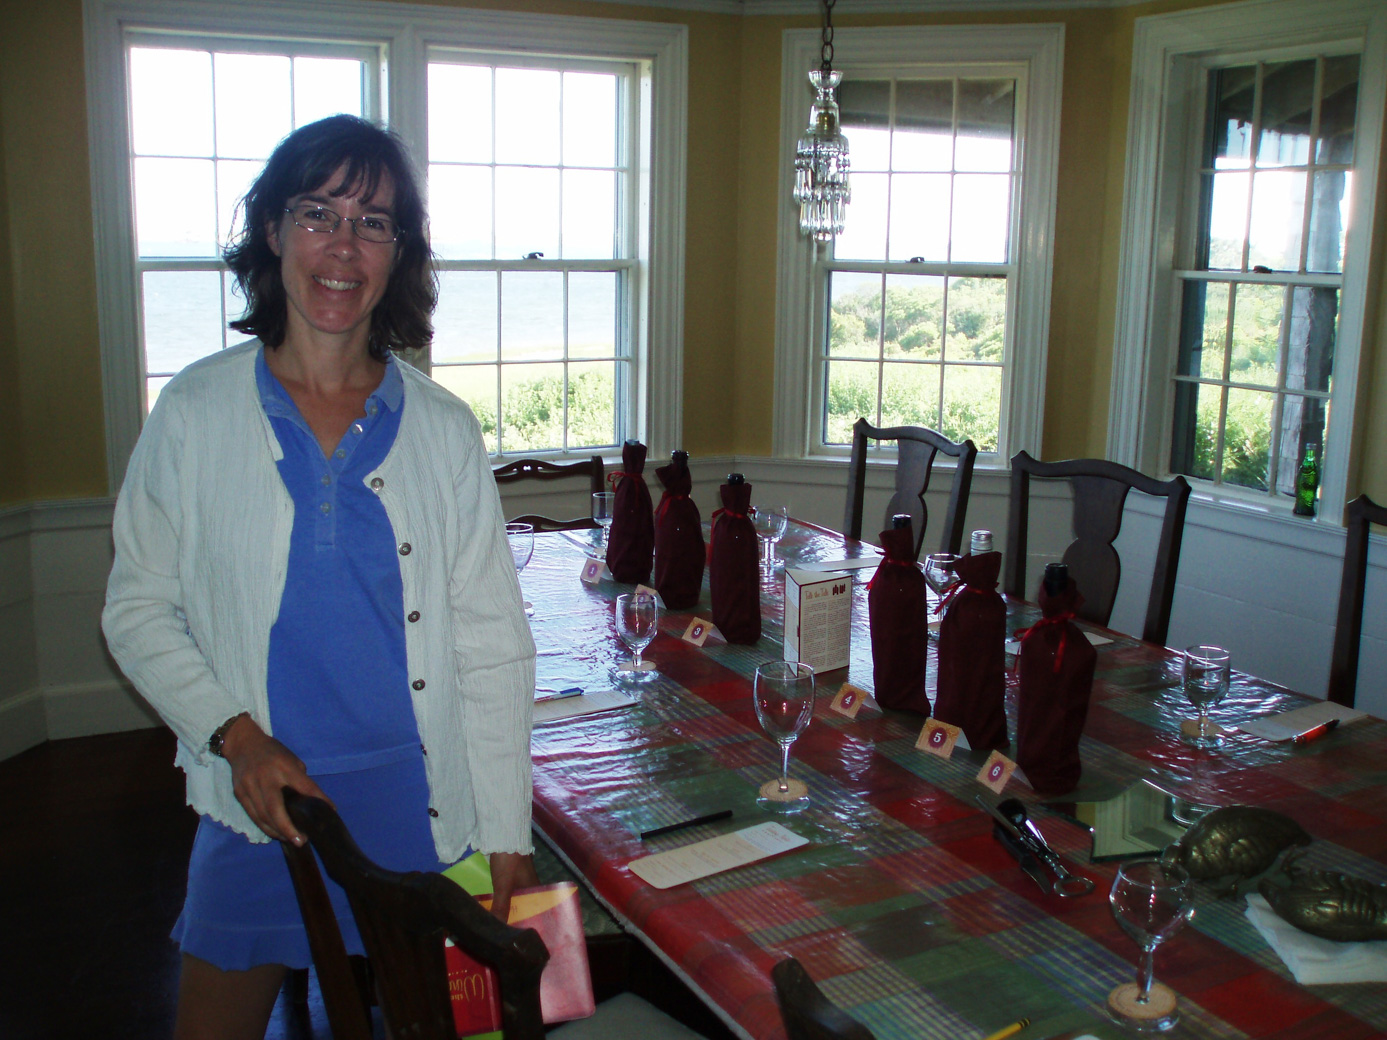 Kelly with wine bottles